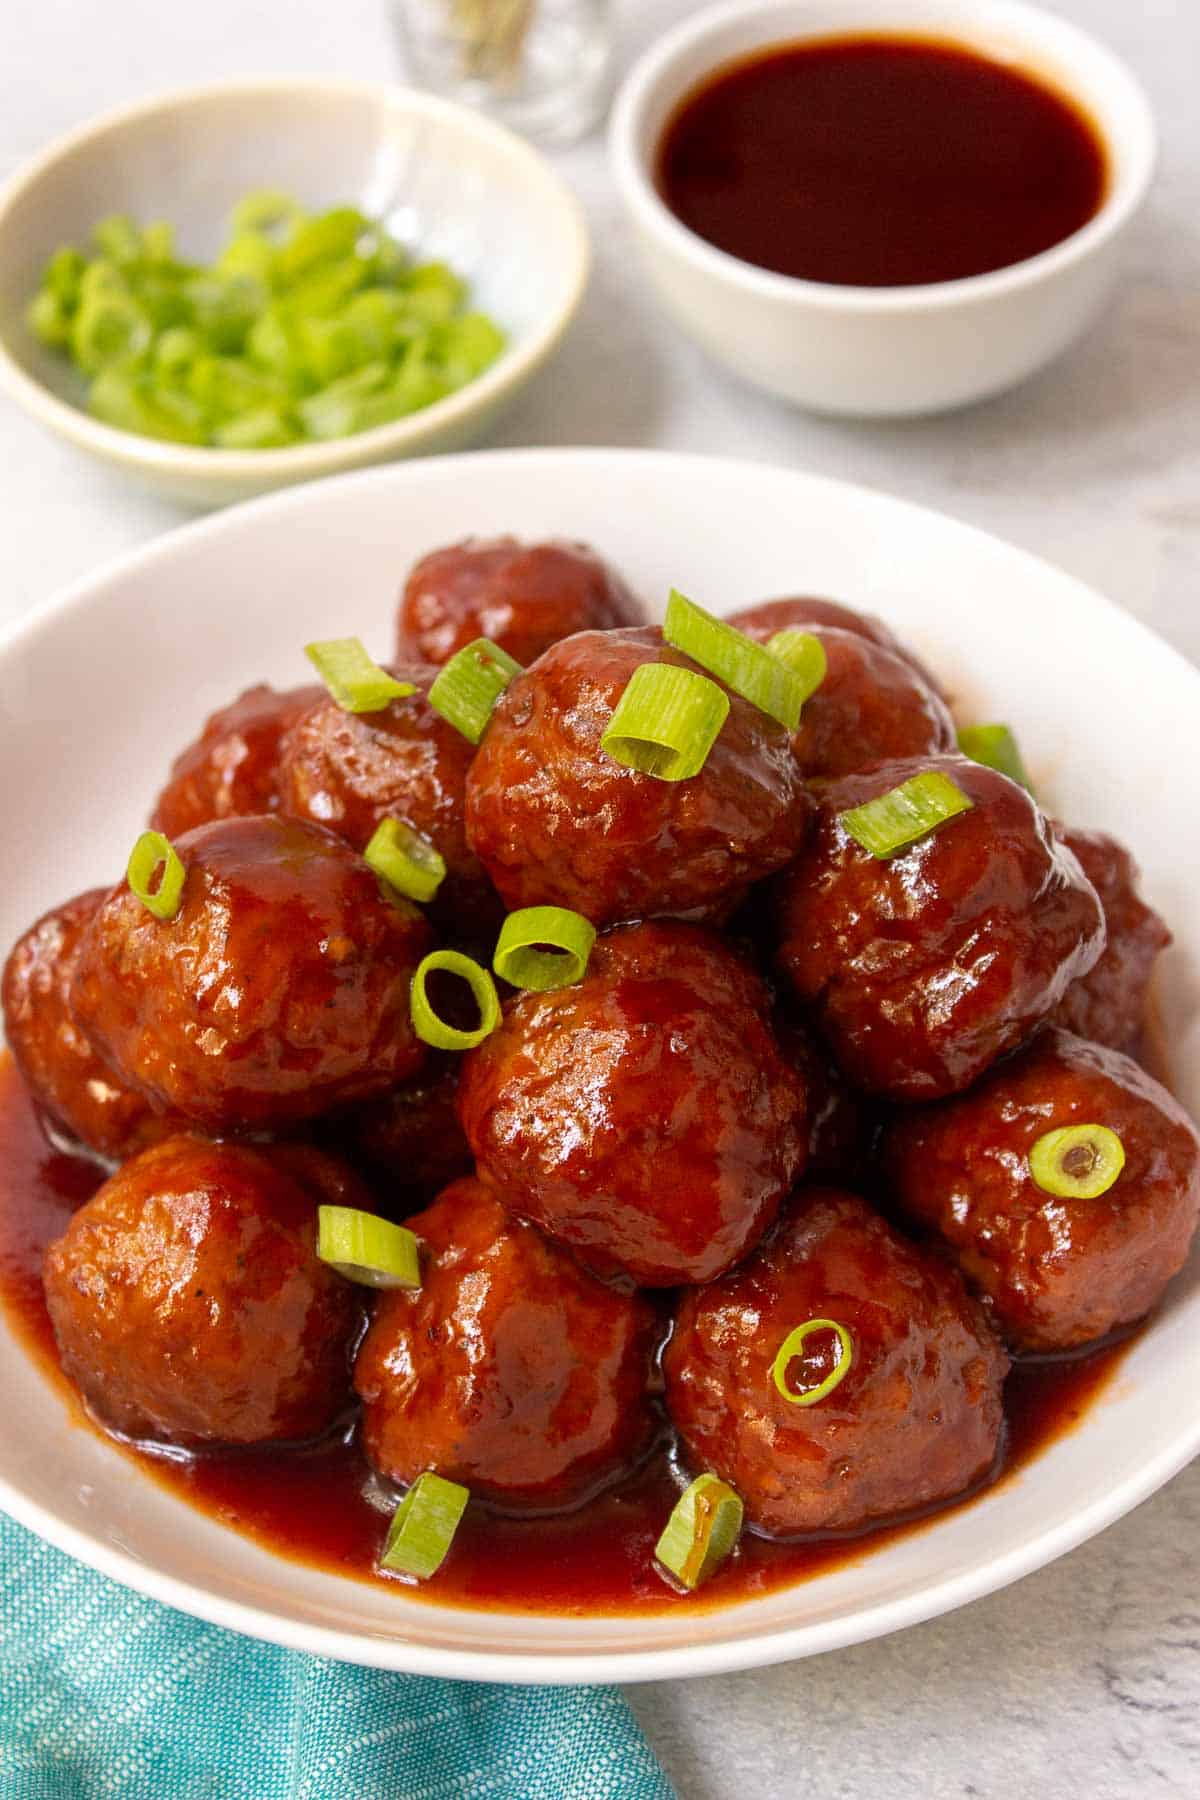 Instant Pot Grape Jelly Meatballs garnished with sliced green onions